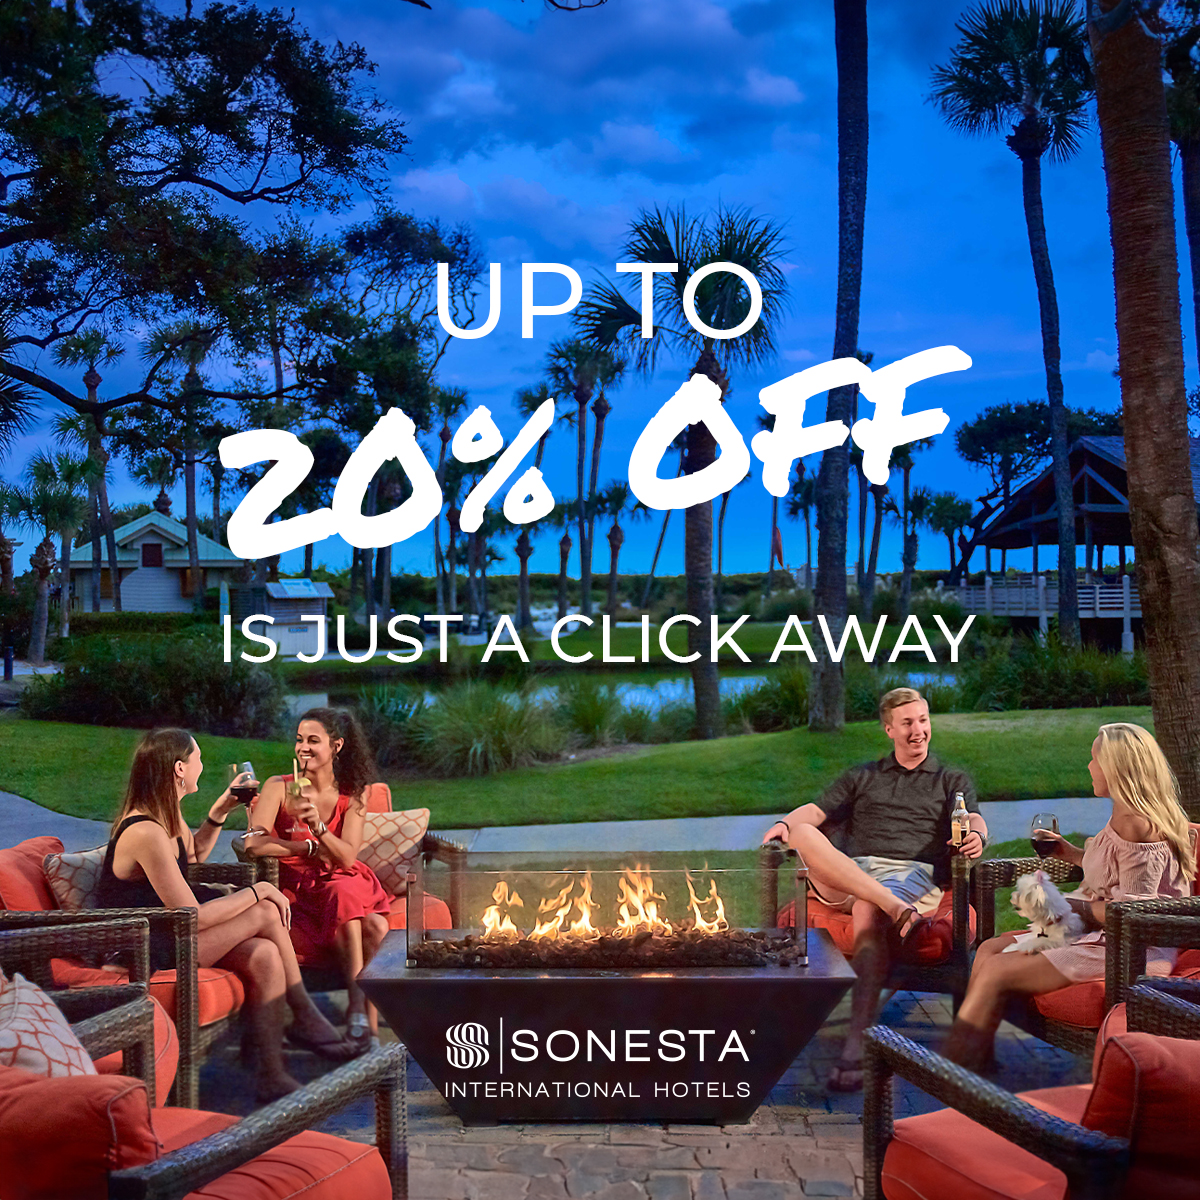 A vacay in the near future is calling your name! For a limited time, save up to 20% on your next Sonesta stay when you book with code GETAWAY. But don’t let your getaway get away – book before October 11! Start planning today: bit.ly/44NcgZa